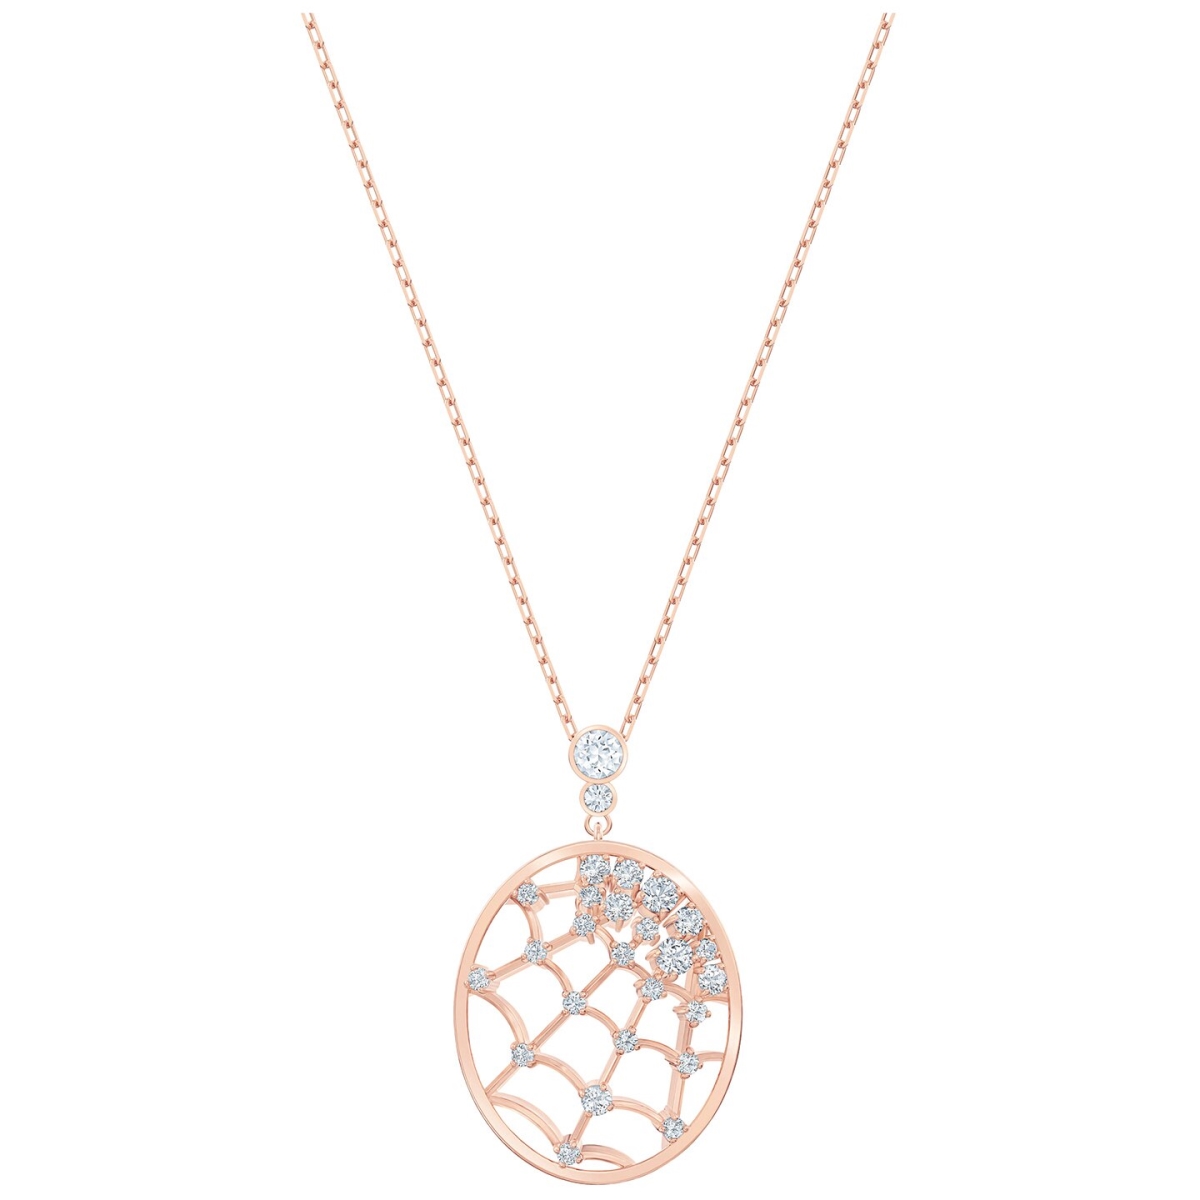 5488405 Precisely Pendant, Rose-gold Tone Plated - White